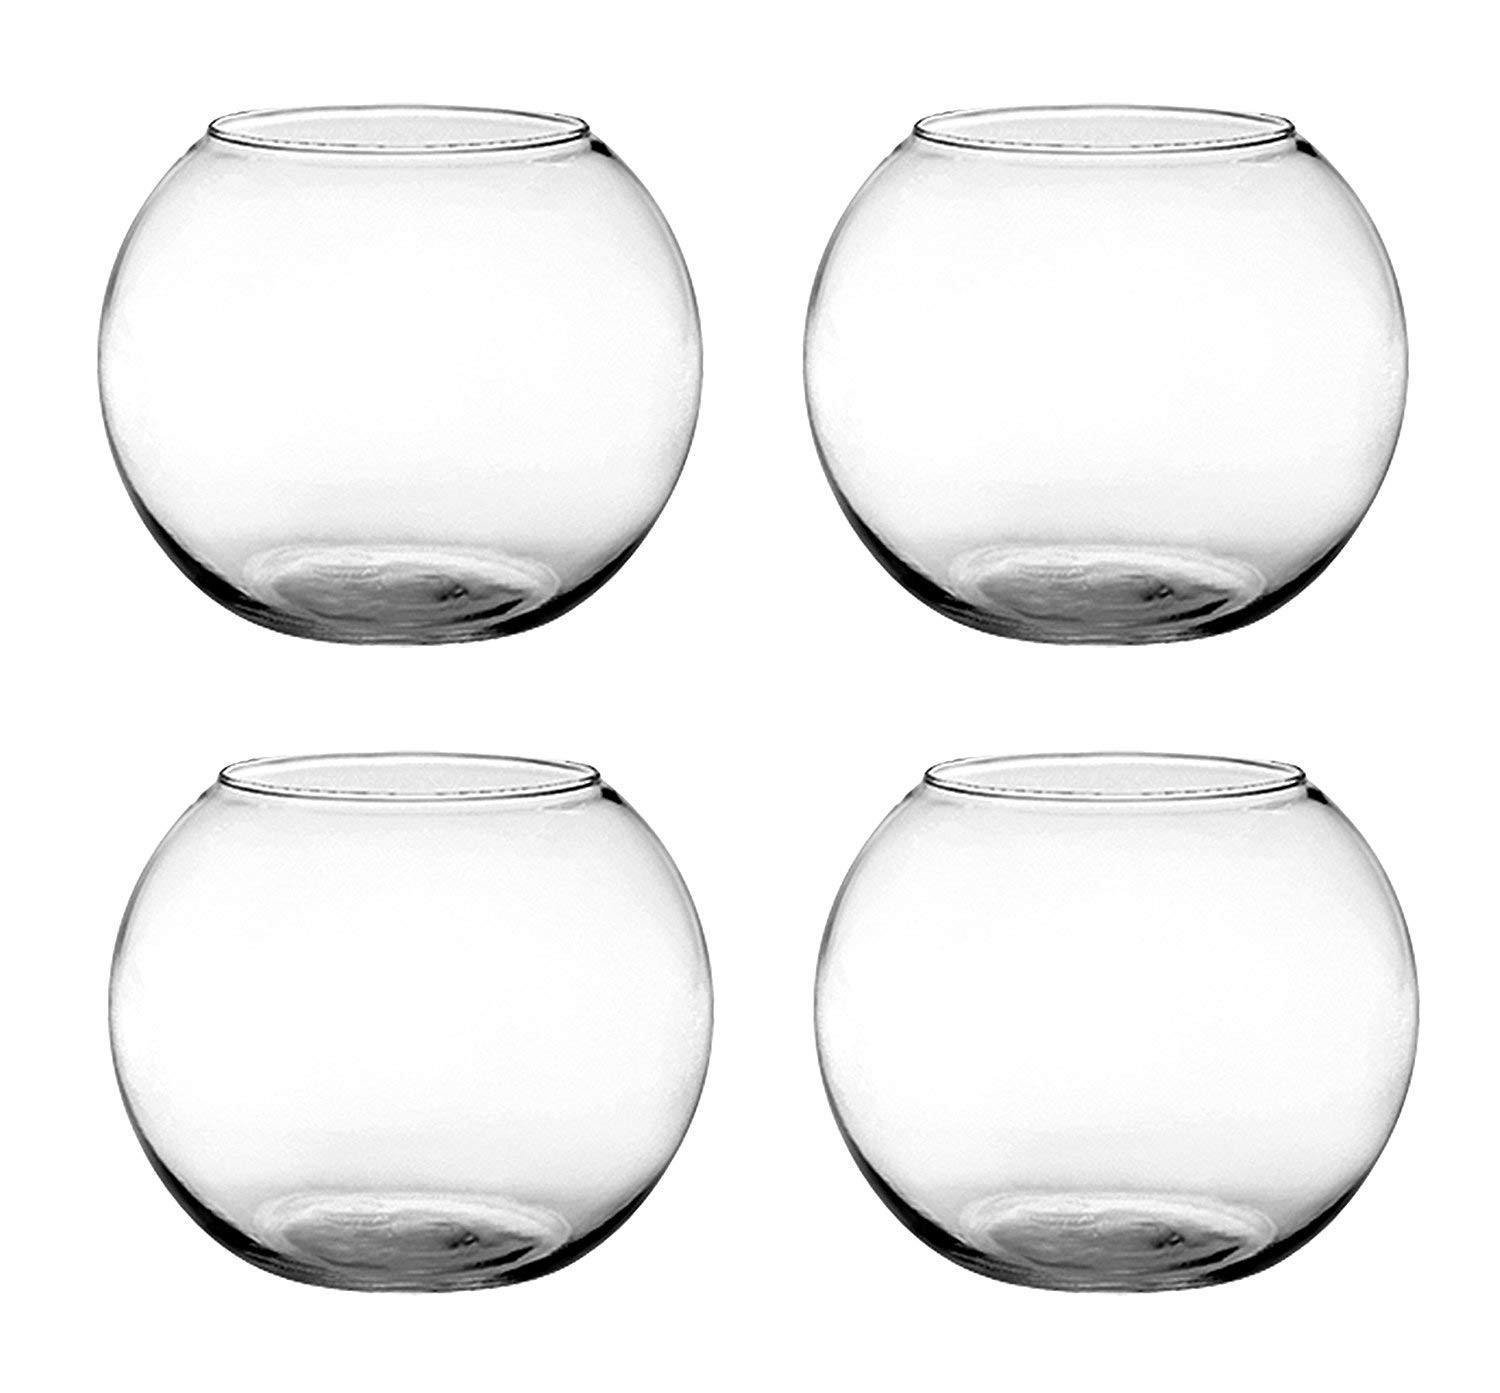 20 Wonderful Clear Glass Cube Vase 2024 free download clear glass cube vase of amazon com floral supply online set of 4 6 rose bowls glass pertaining to amazon com floral supply online set of 4 6 rose bowls glass round vases for weddings events 1